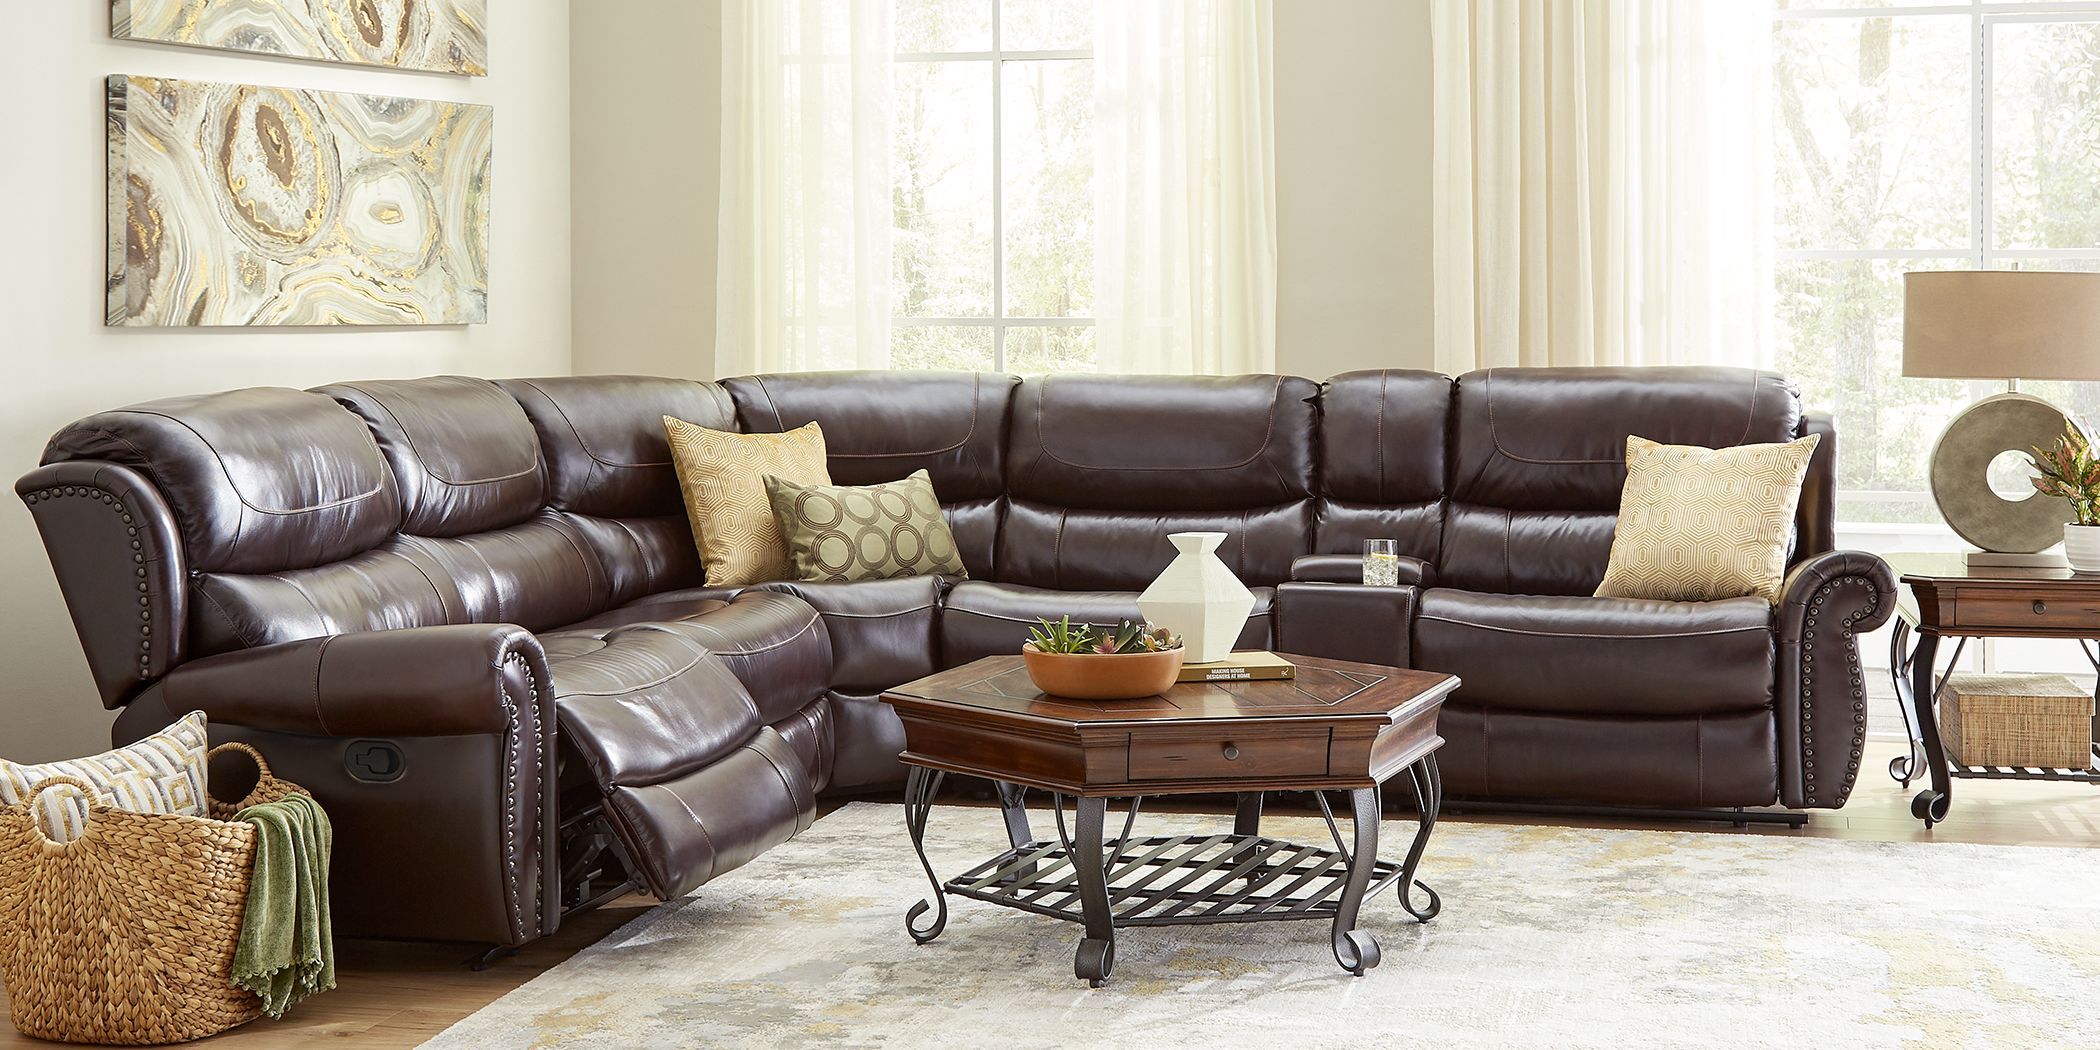 Open Living Room With Leather Sectional